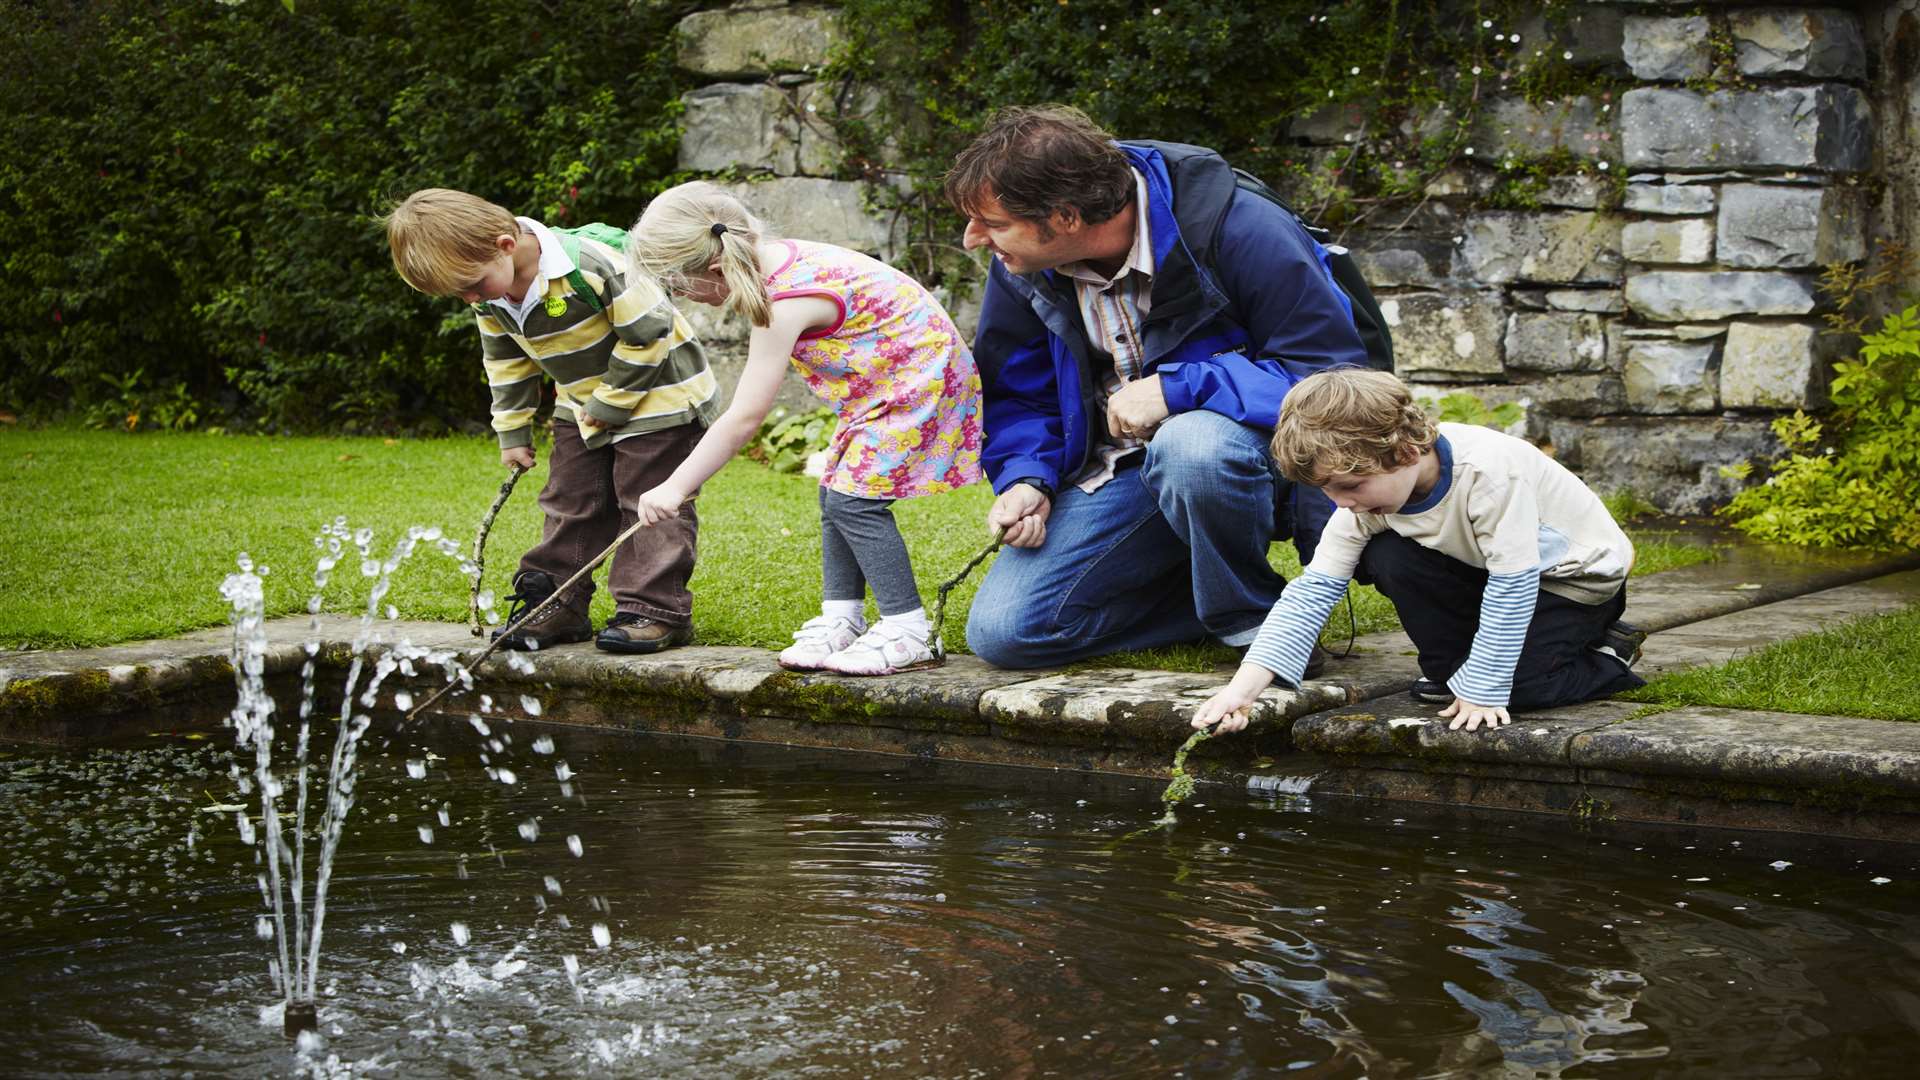 Have some watery fun this summer. Picture: National Trust/Amhel de Serra